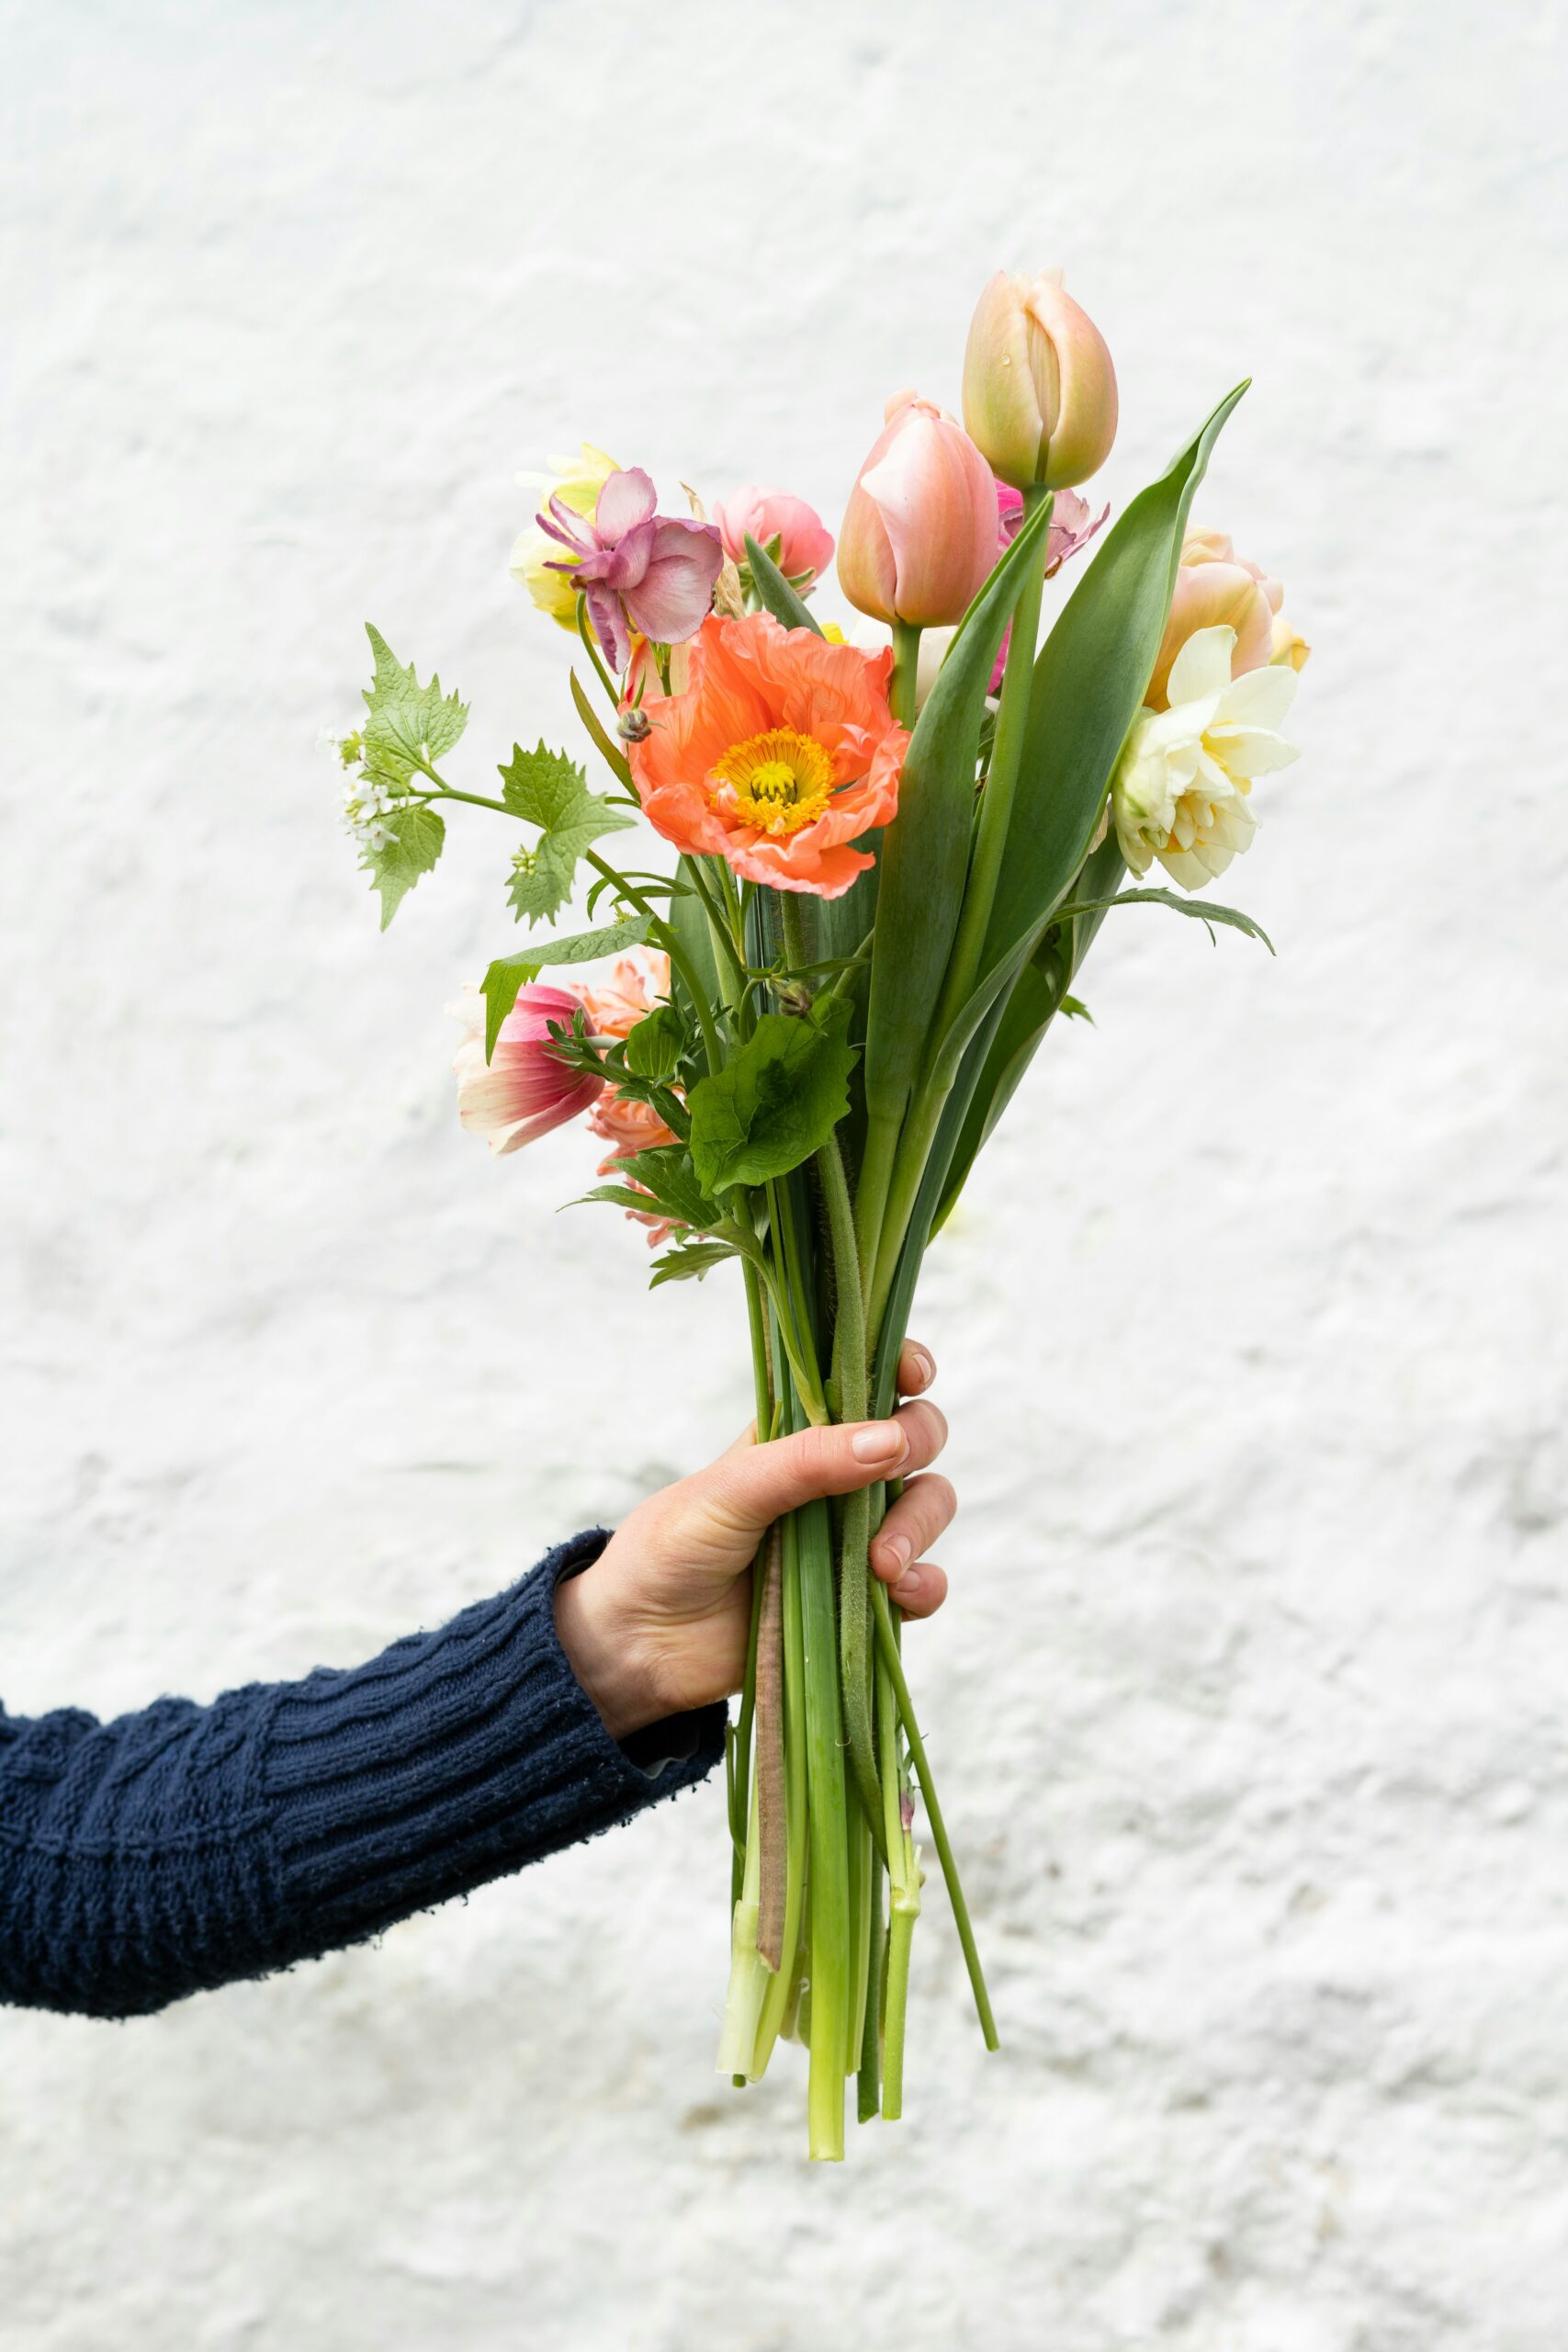 a hand holding a bouquet of spring flowers